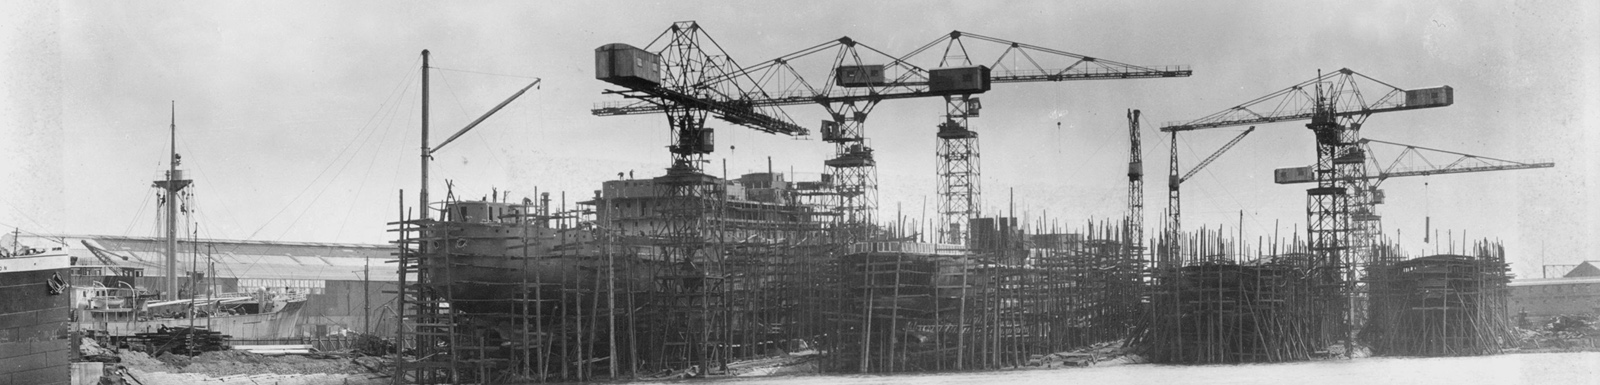 Shipbuilding on the Clyde, image courtesy Culture & Sport Glasgow/Mitchell Library